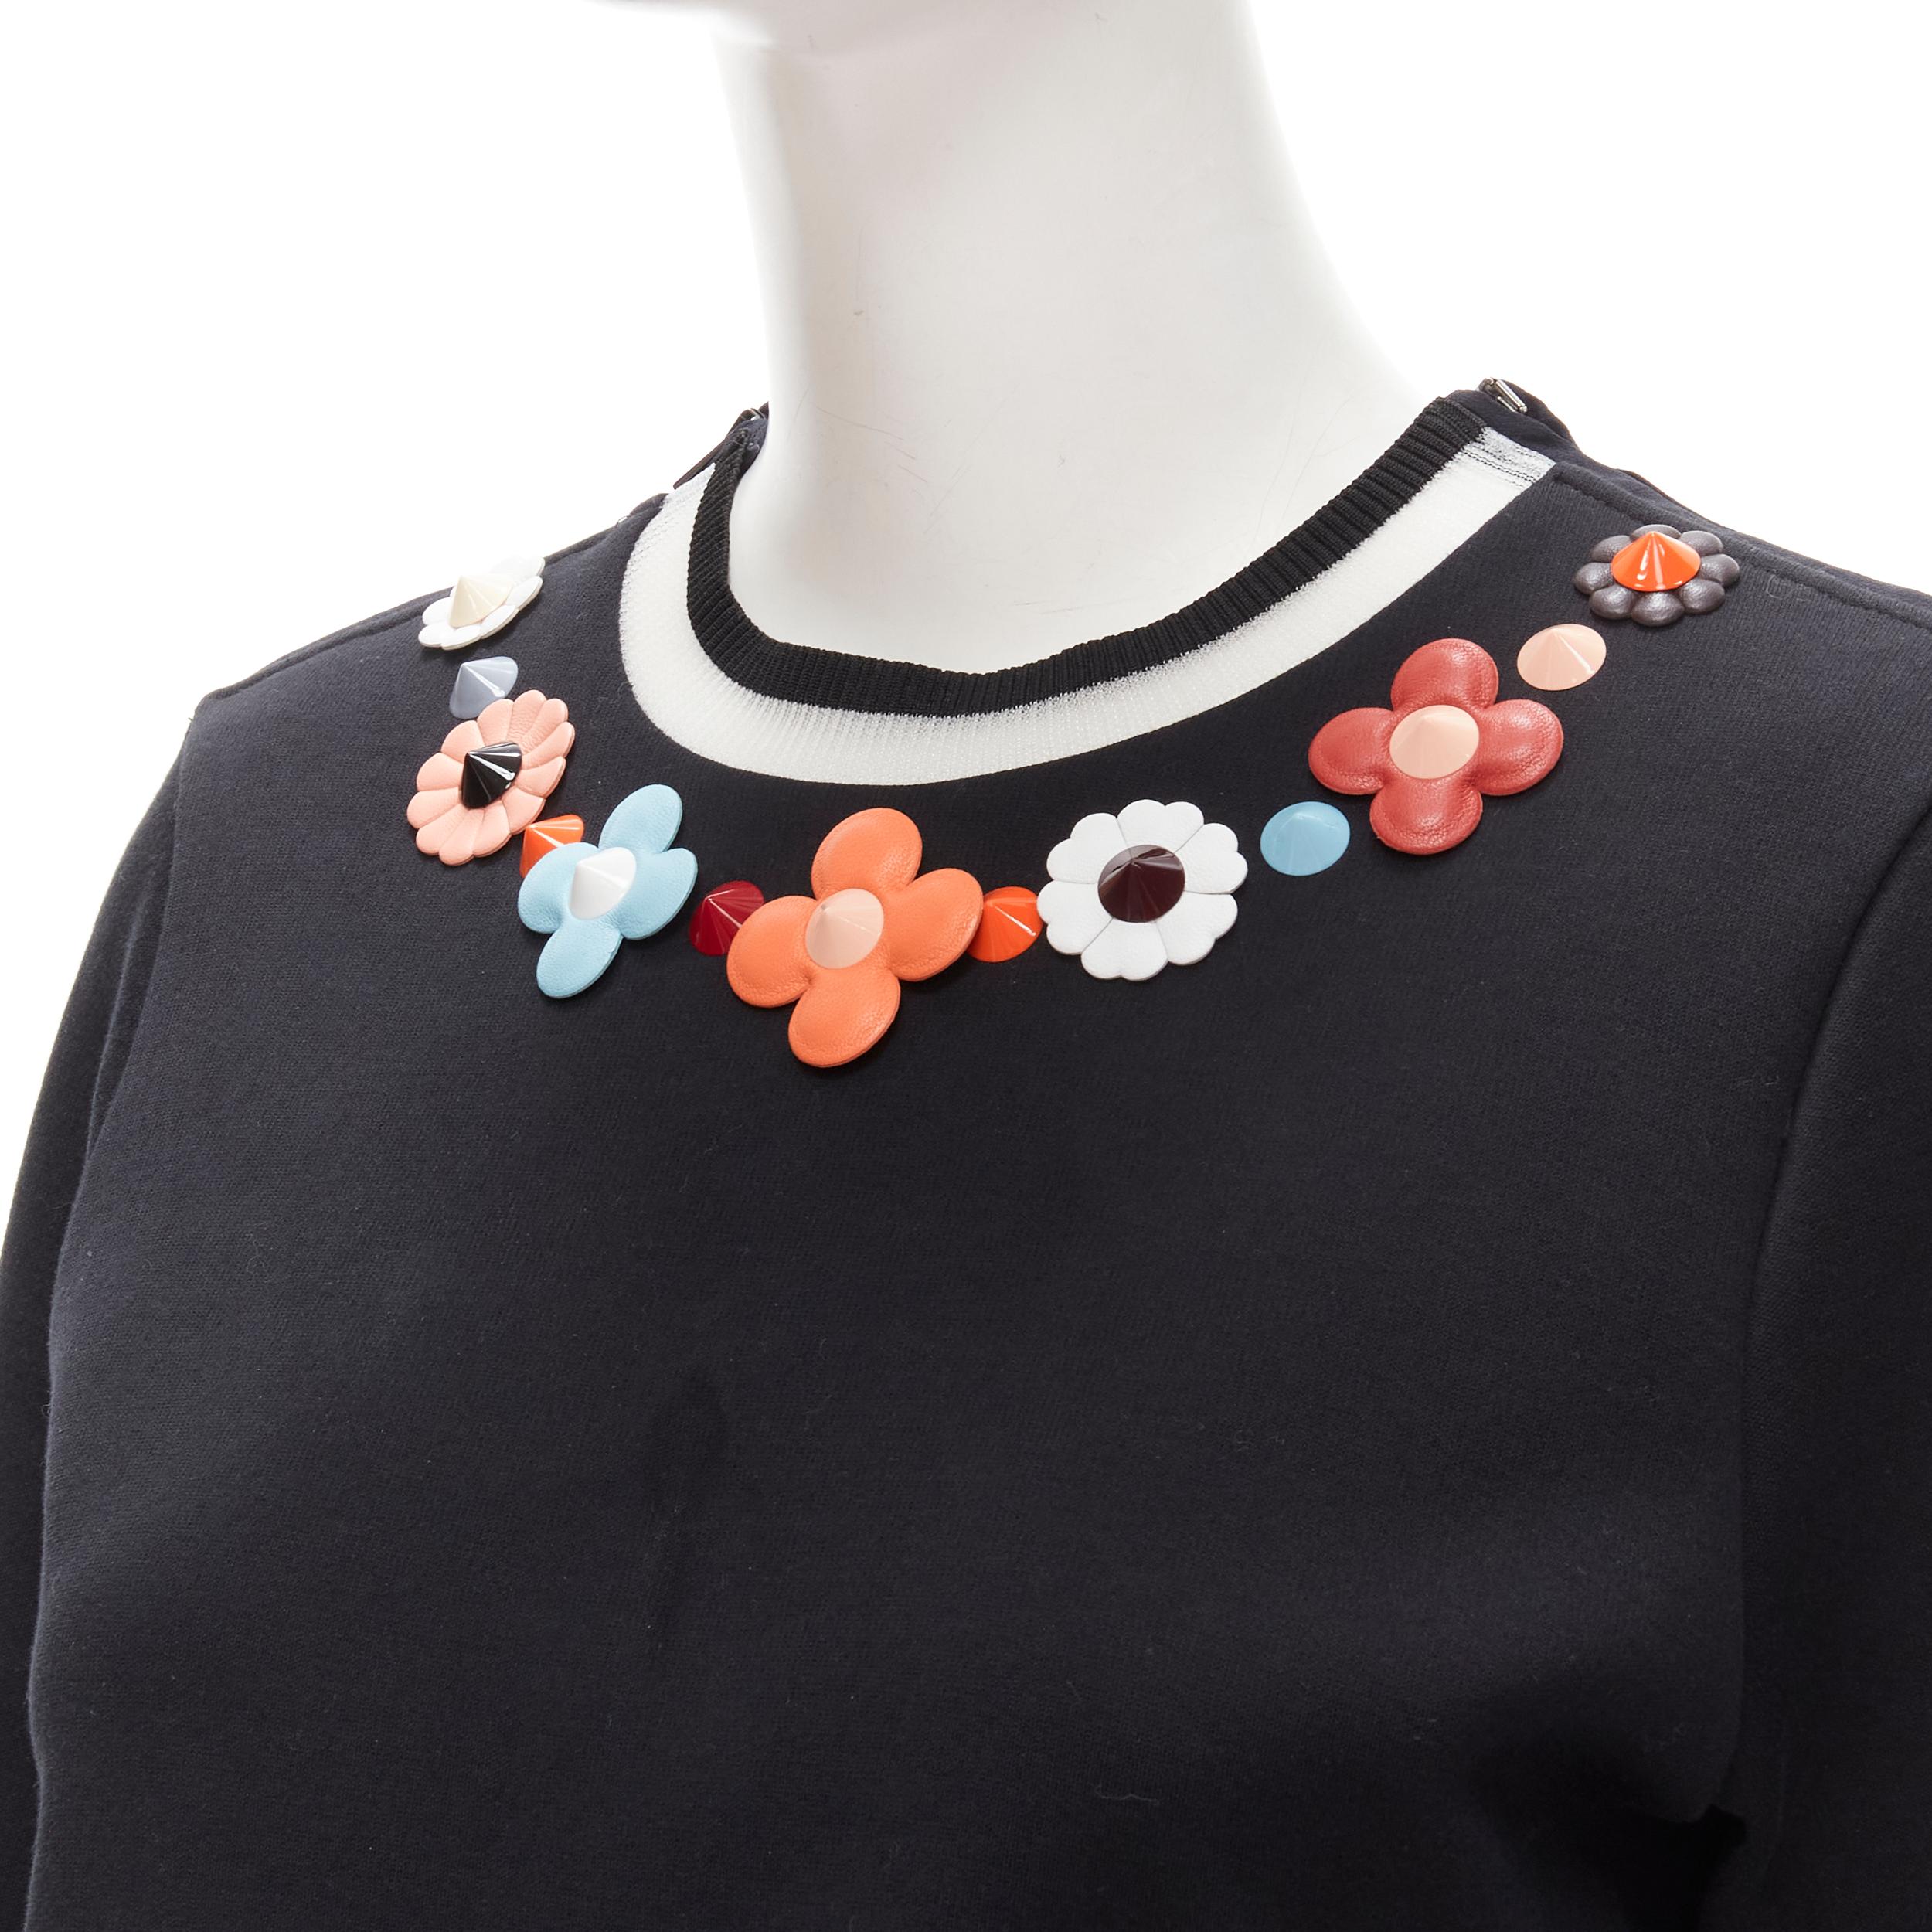 FENDI Flowerland leather spike stud mesh crew neck pullover sweater S
Brand: Fendi
Collection: Flowerland 
Material: Feels like cotton
Color: Black
Pattern: Solid
Closure: Zip
Extra Detail: Mesh insert at collar. Zip along shoulder seam. Floral